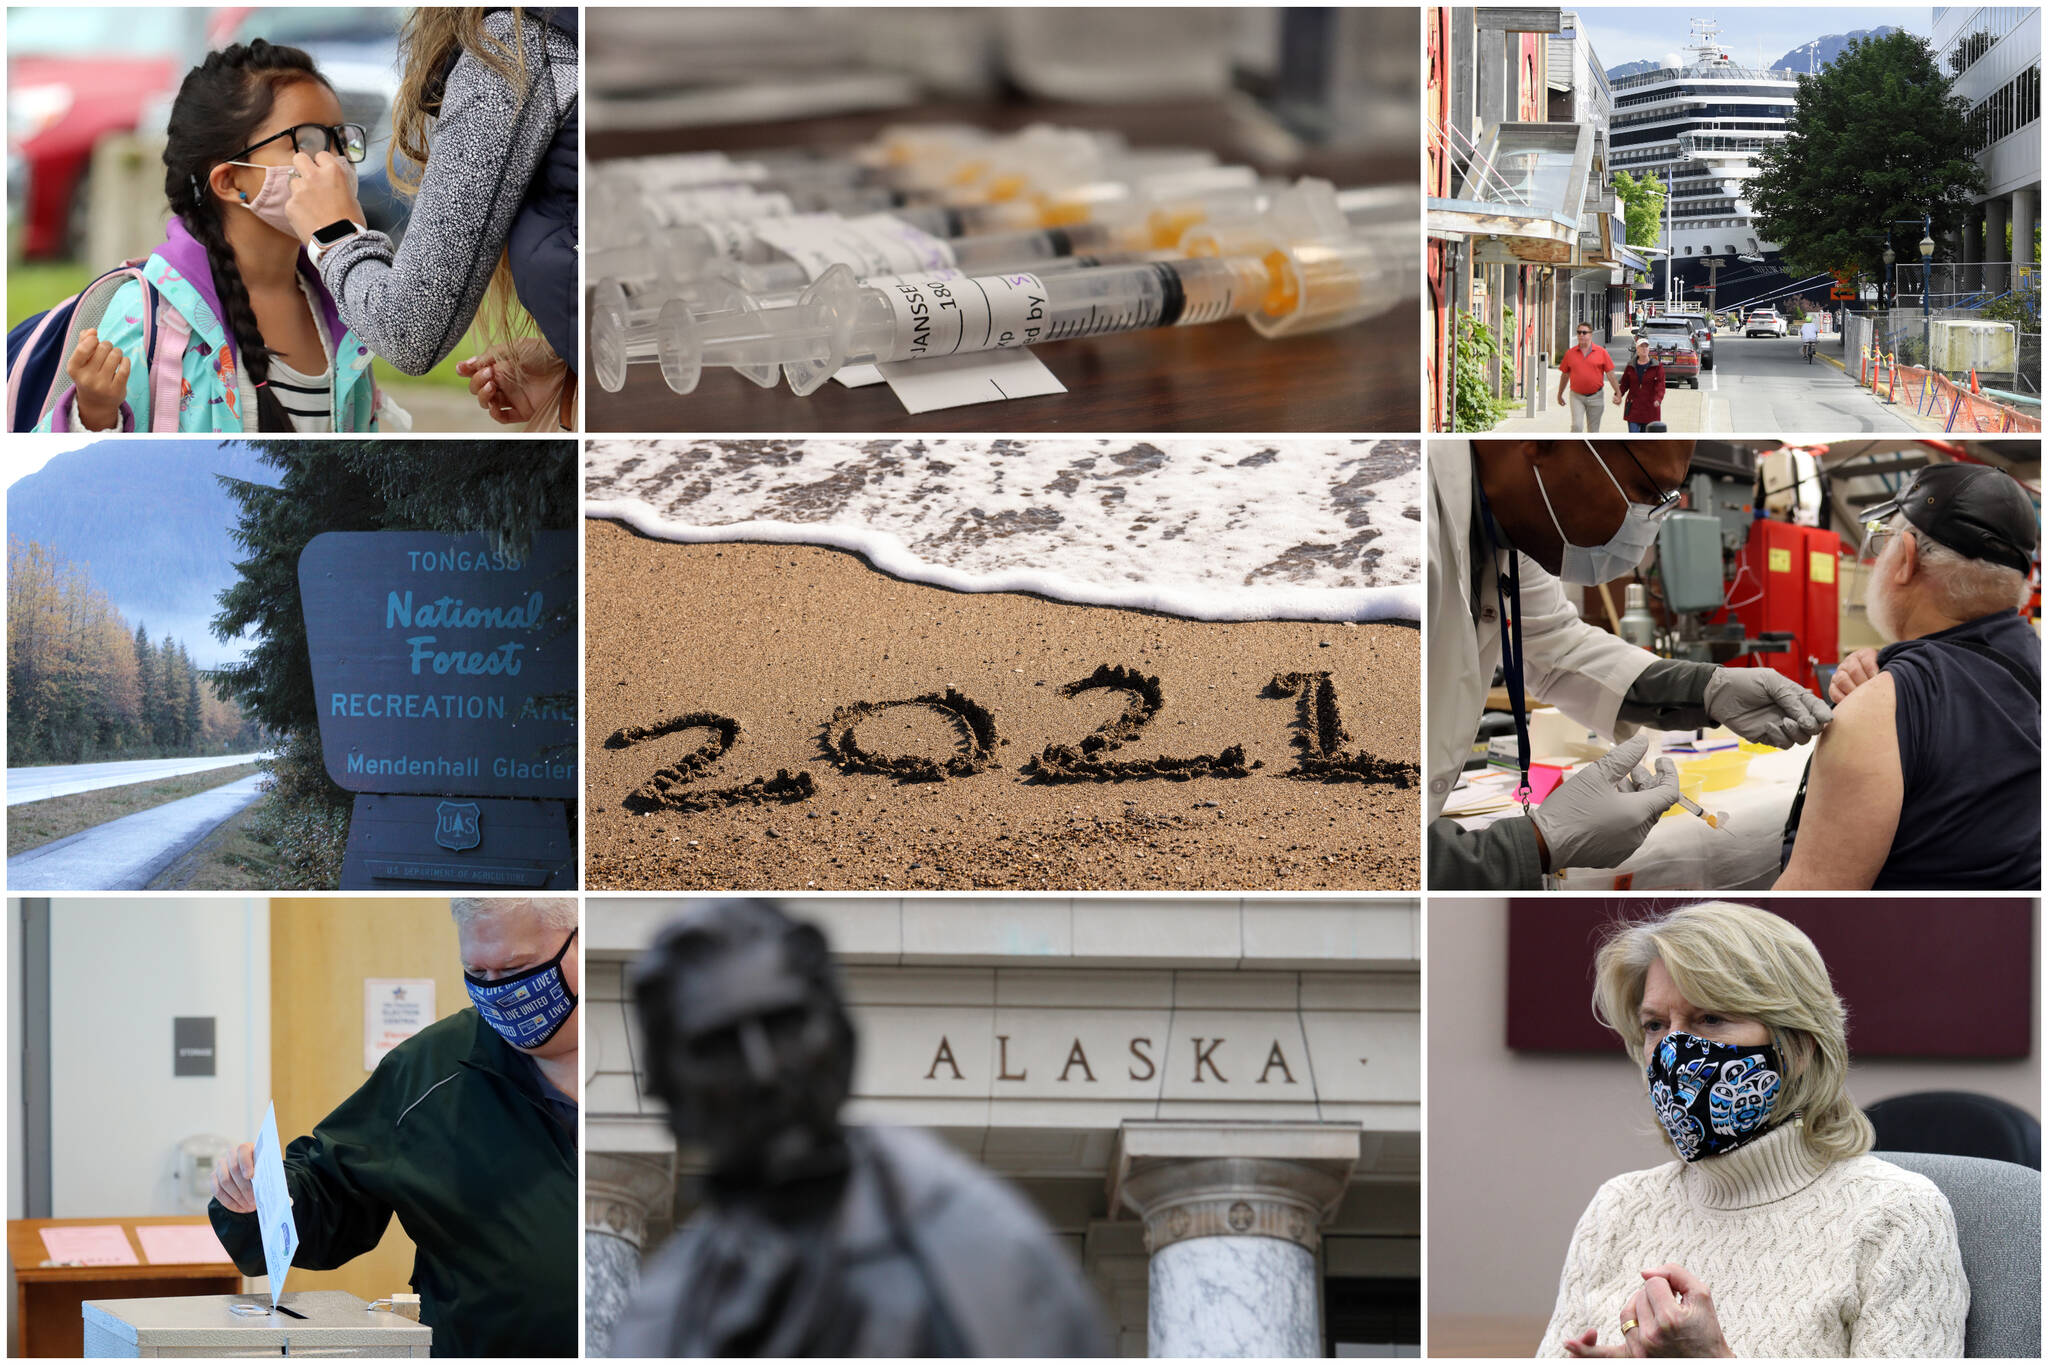 This combination image shows photos from stories that defined 2021. Top left, Vanessa Dickinson adjusts second grade student Kanani Dickinson's glasses ahead of the first day of school. Top middle, doses of COVID-19 vaccination await arms during a vaccine clinic. Top right, a cruise ship looms large over downtown Juneau. Middle left, a sign marks the Mendenhall Glacier Recreation Area as part of the Tongass National Forest. Middle, the bygone calendar year is written in the sand. Middle right, Alan Salsman receives the Johnson & Johnson COVID-19 vaccine from VA nurse Michael Addo at Coast Guard Station Juneau. Bottom left, School board member Emil Mackey casts a ballot in Juneau's municipal election. Bottom middle, the Alaska State Capitol stands behind a statue of William H. Seward. Bottom left, Sen. Lisa Murkowski talks during a sitdown in the Empire offices. (Juneau Empire Photos, Engin Akyurt / Unsplash)